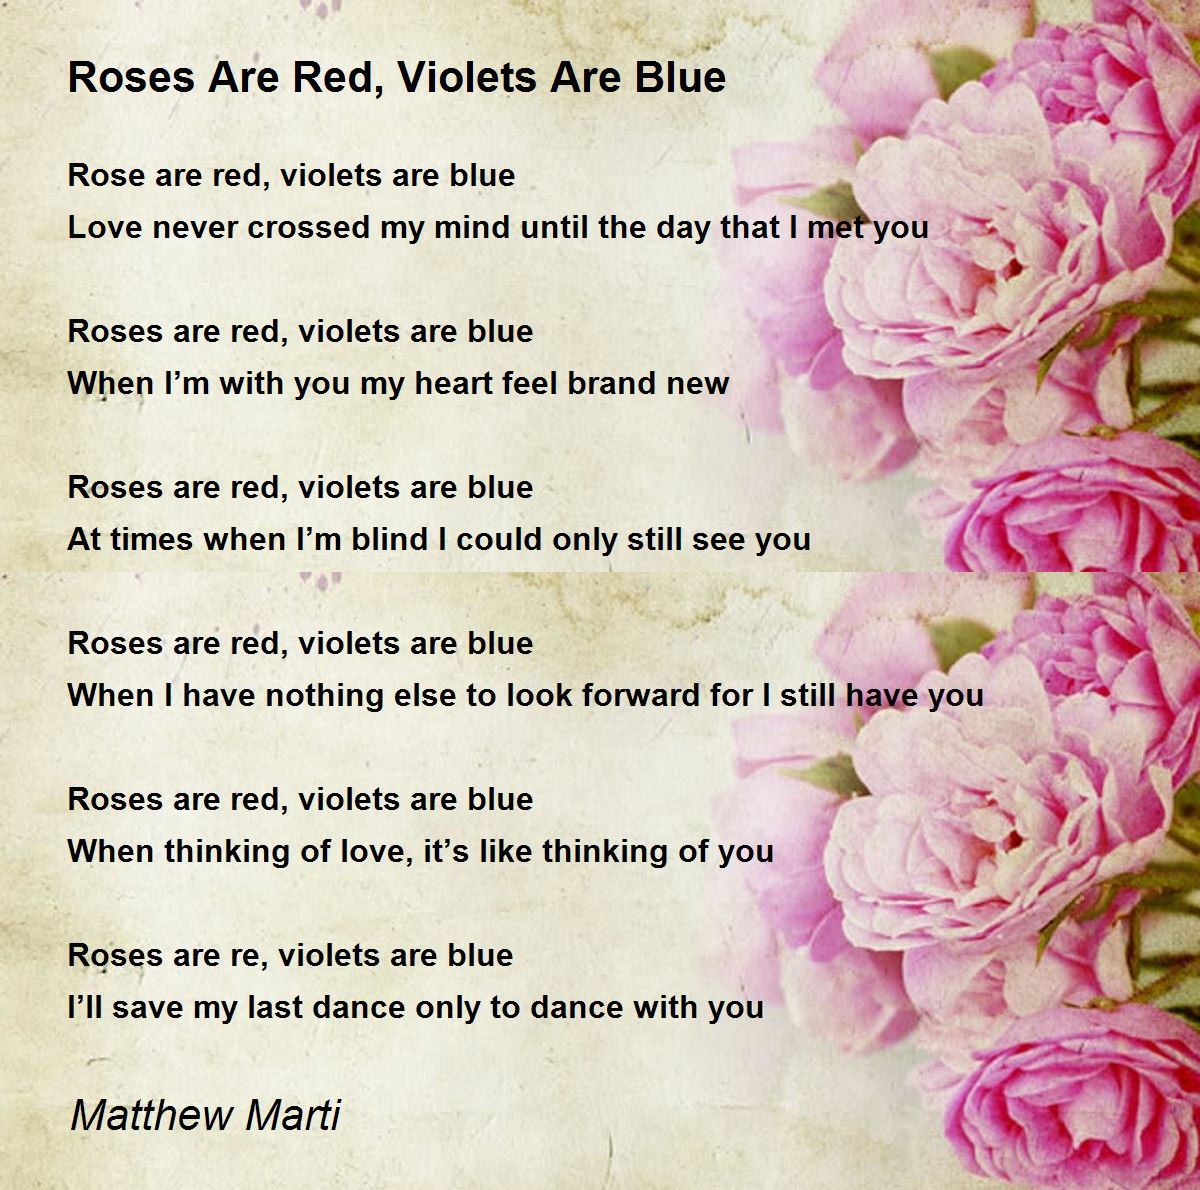 Roses Are Red, Violets Are Blue - Roses Are Red, Violets Blue Poem by Matthew Marti